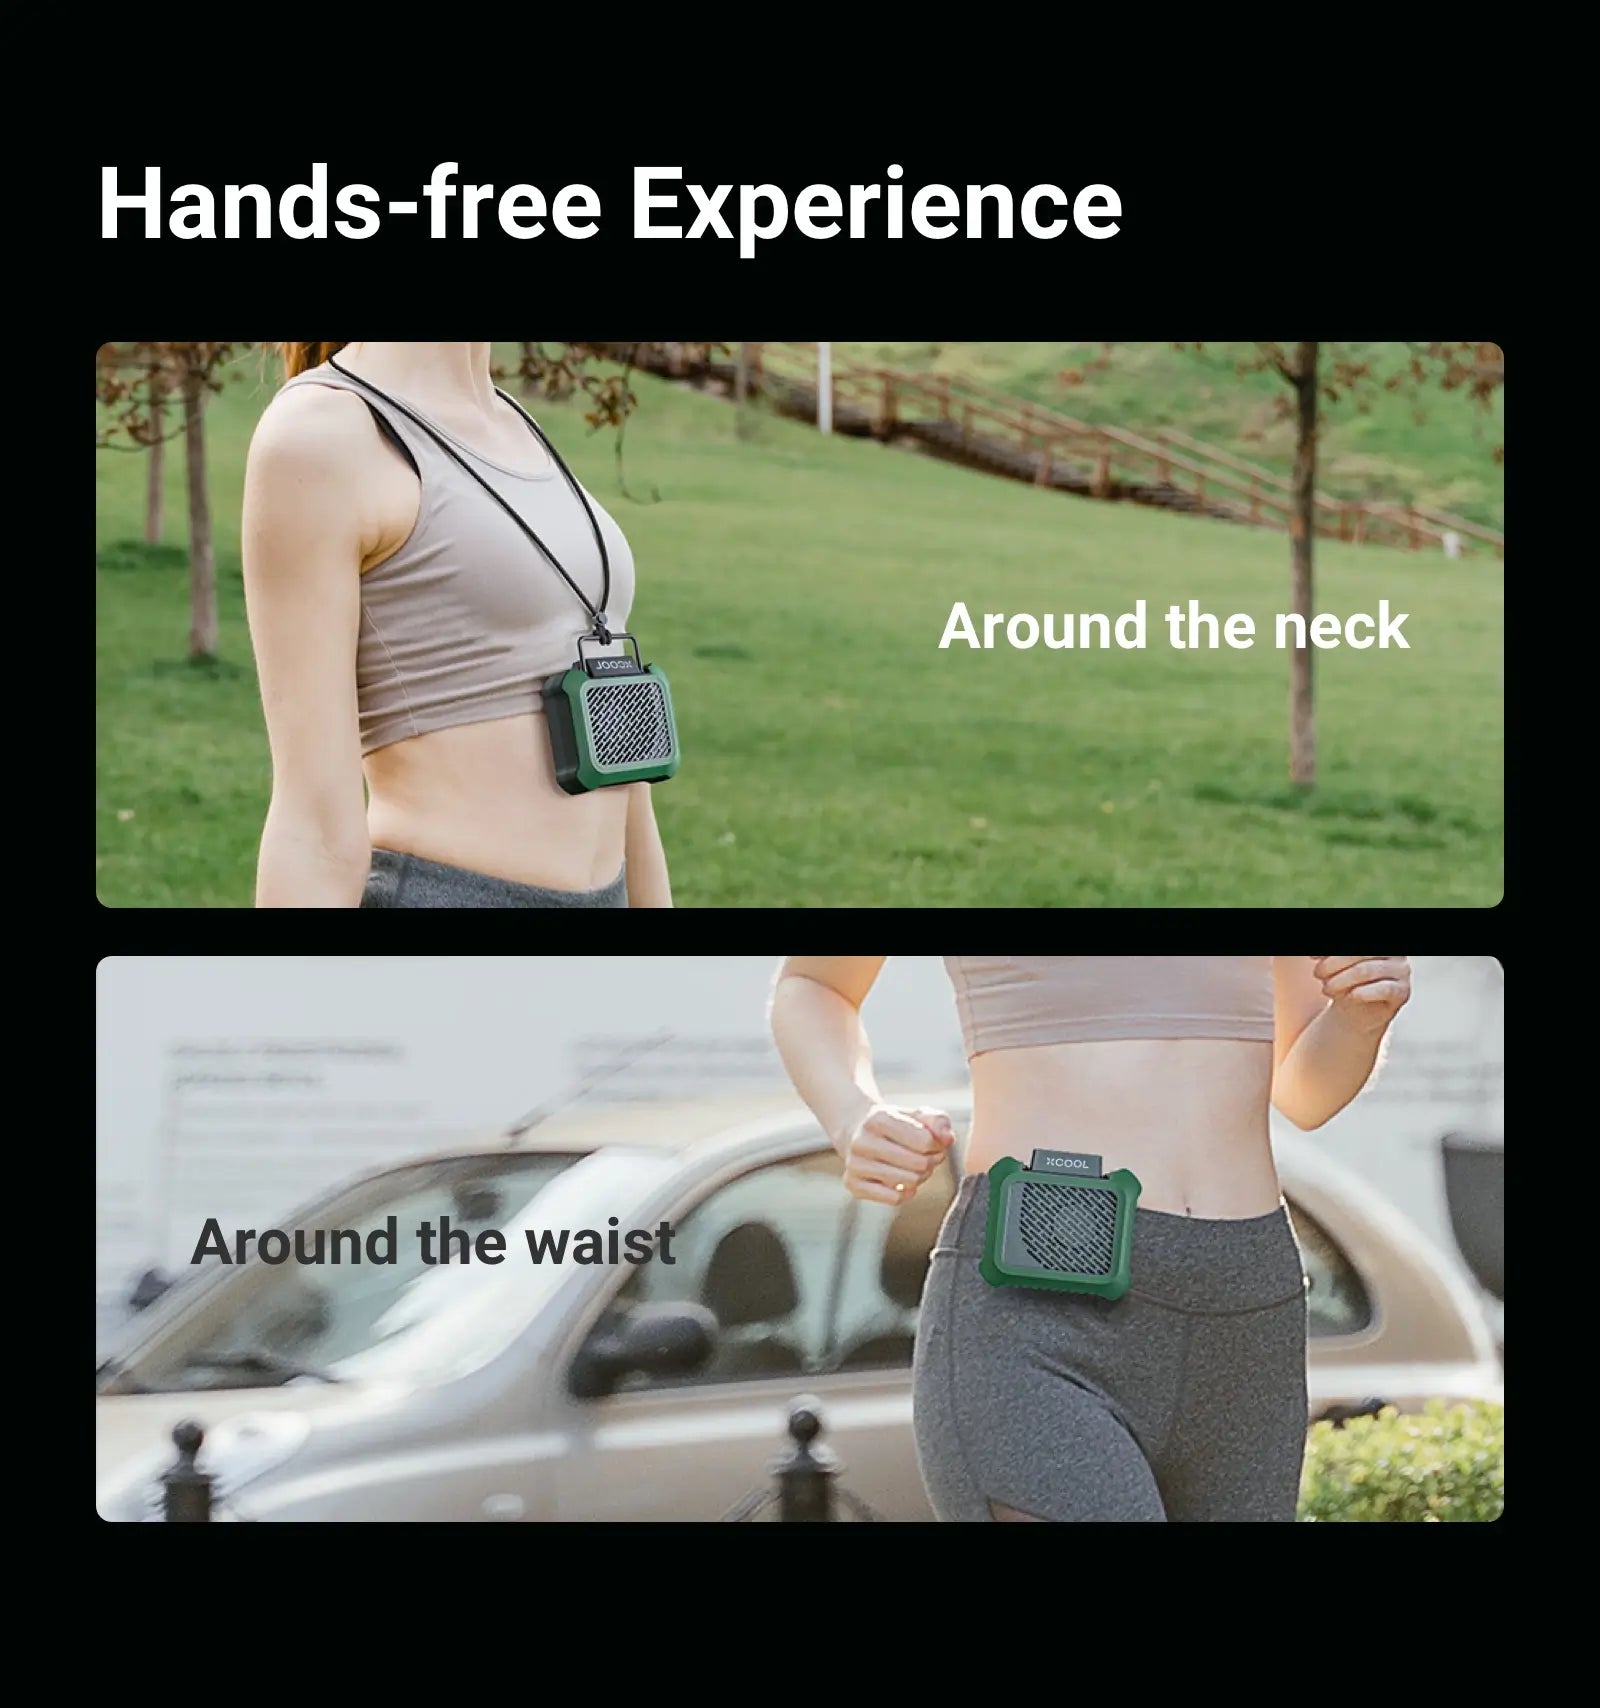 Hands-free Experience